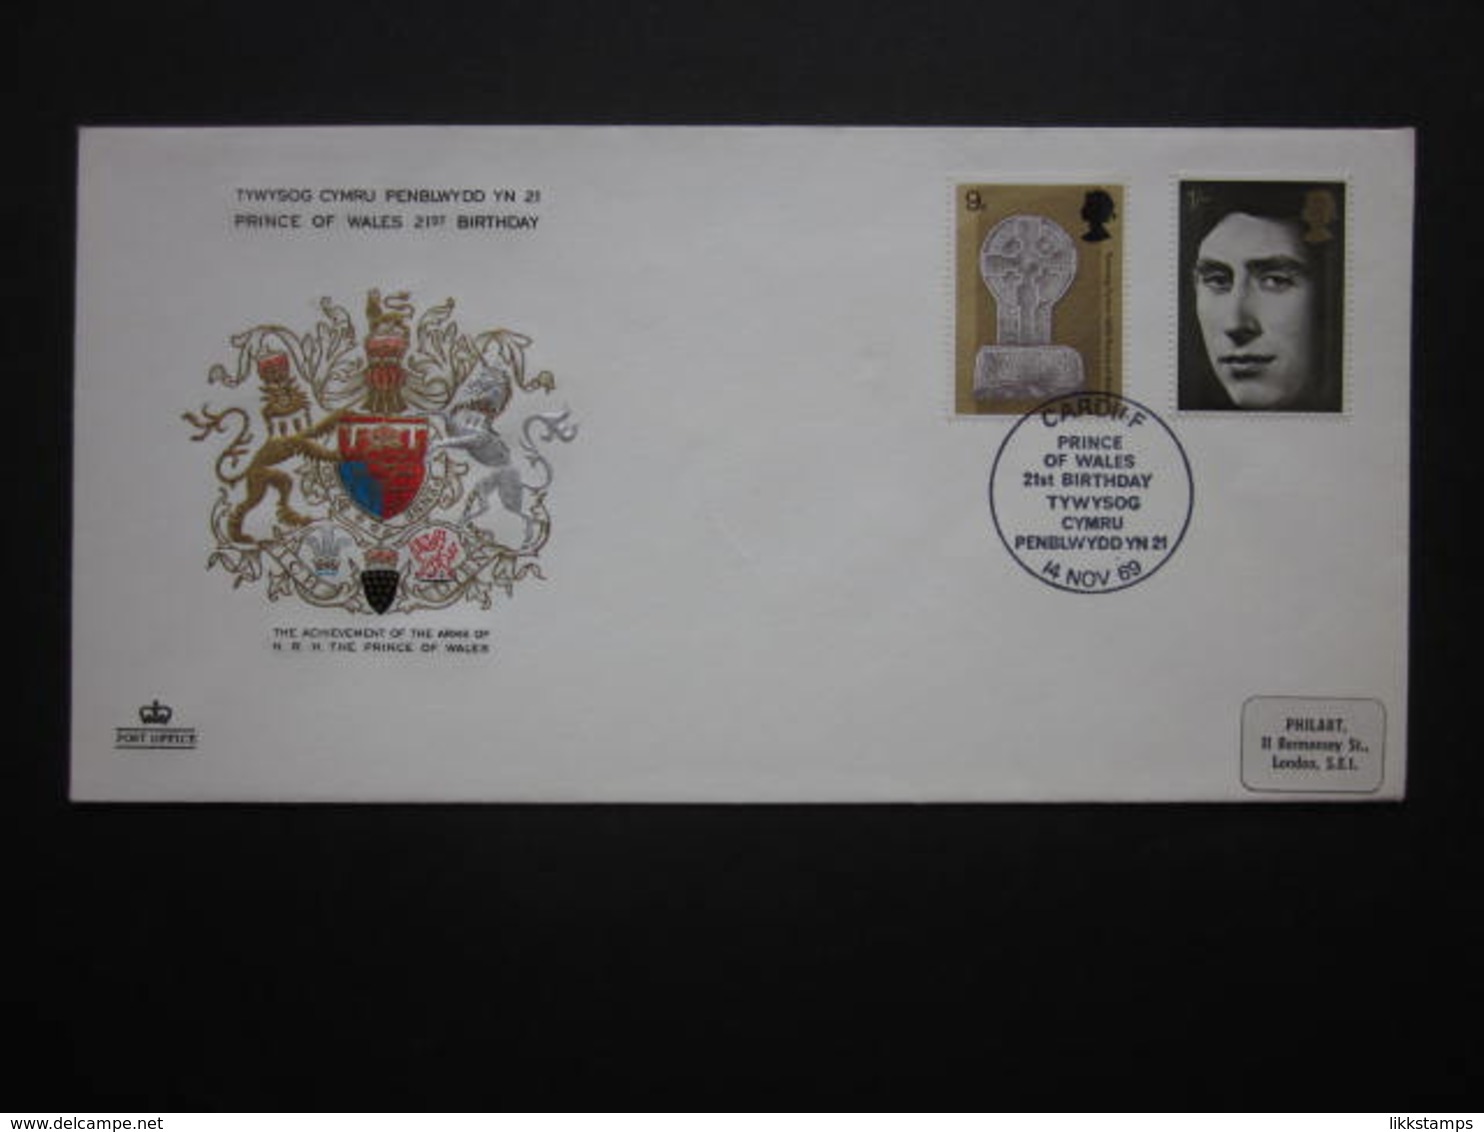 1969 THE PRINCE OF WALES 21st BIRTHDAY SOUVENIR COVER.(B) #00992 - 1952-1971 Pre-Decimal Issues